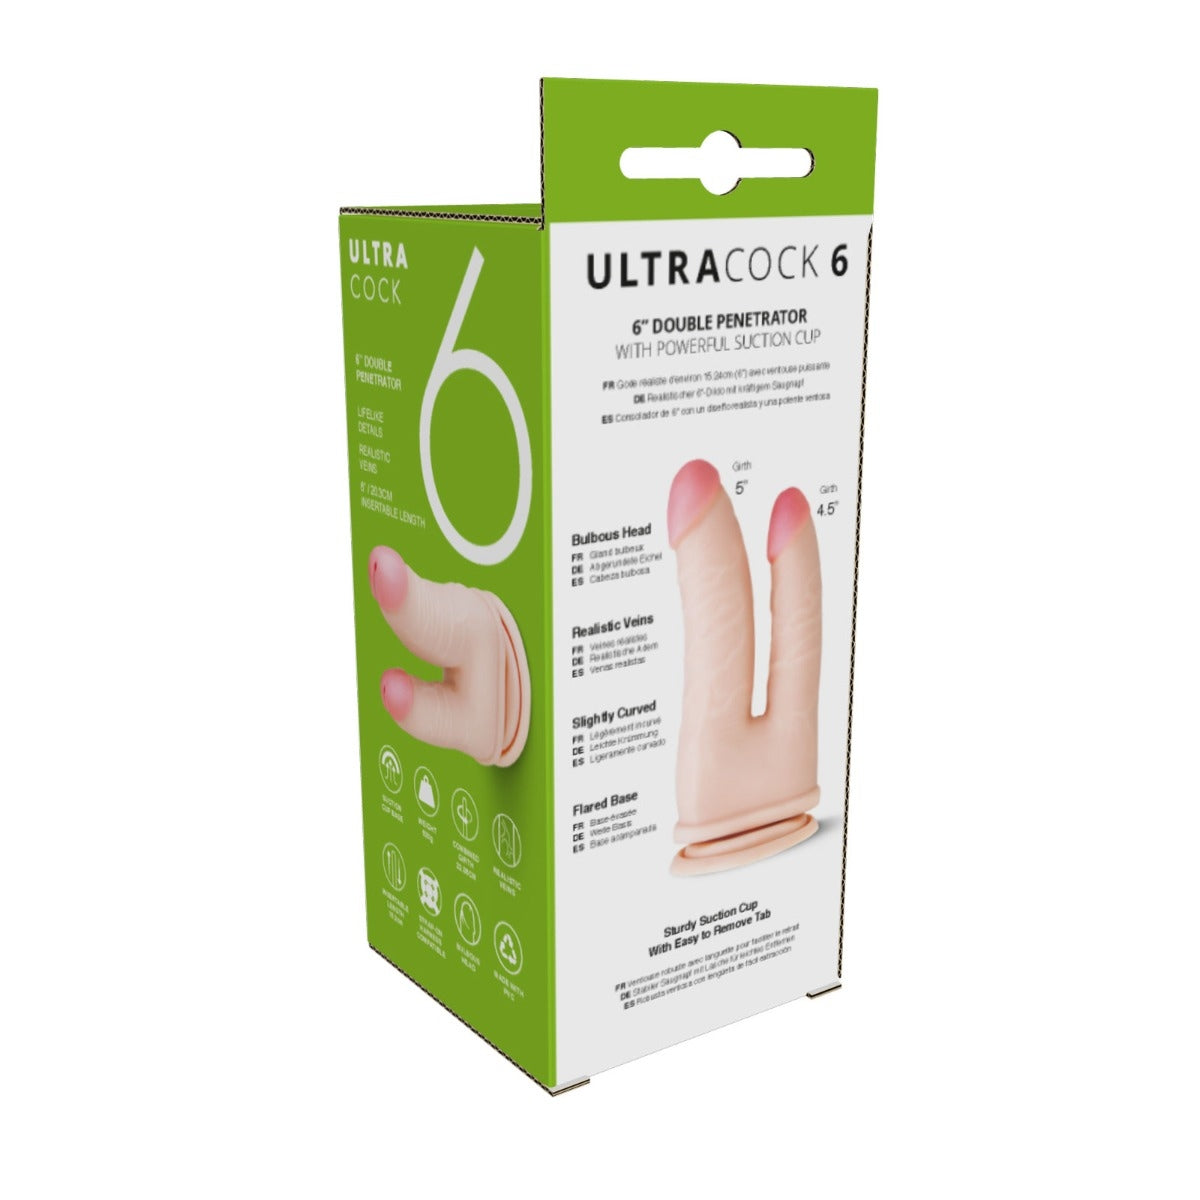 Me You Us Ultra Cock Double Penetrator Dildo Pink 6 Inch